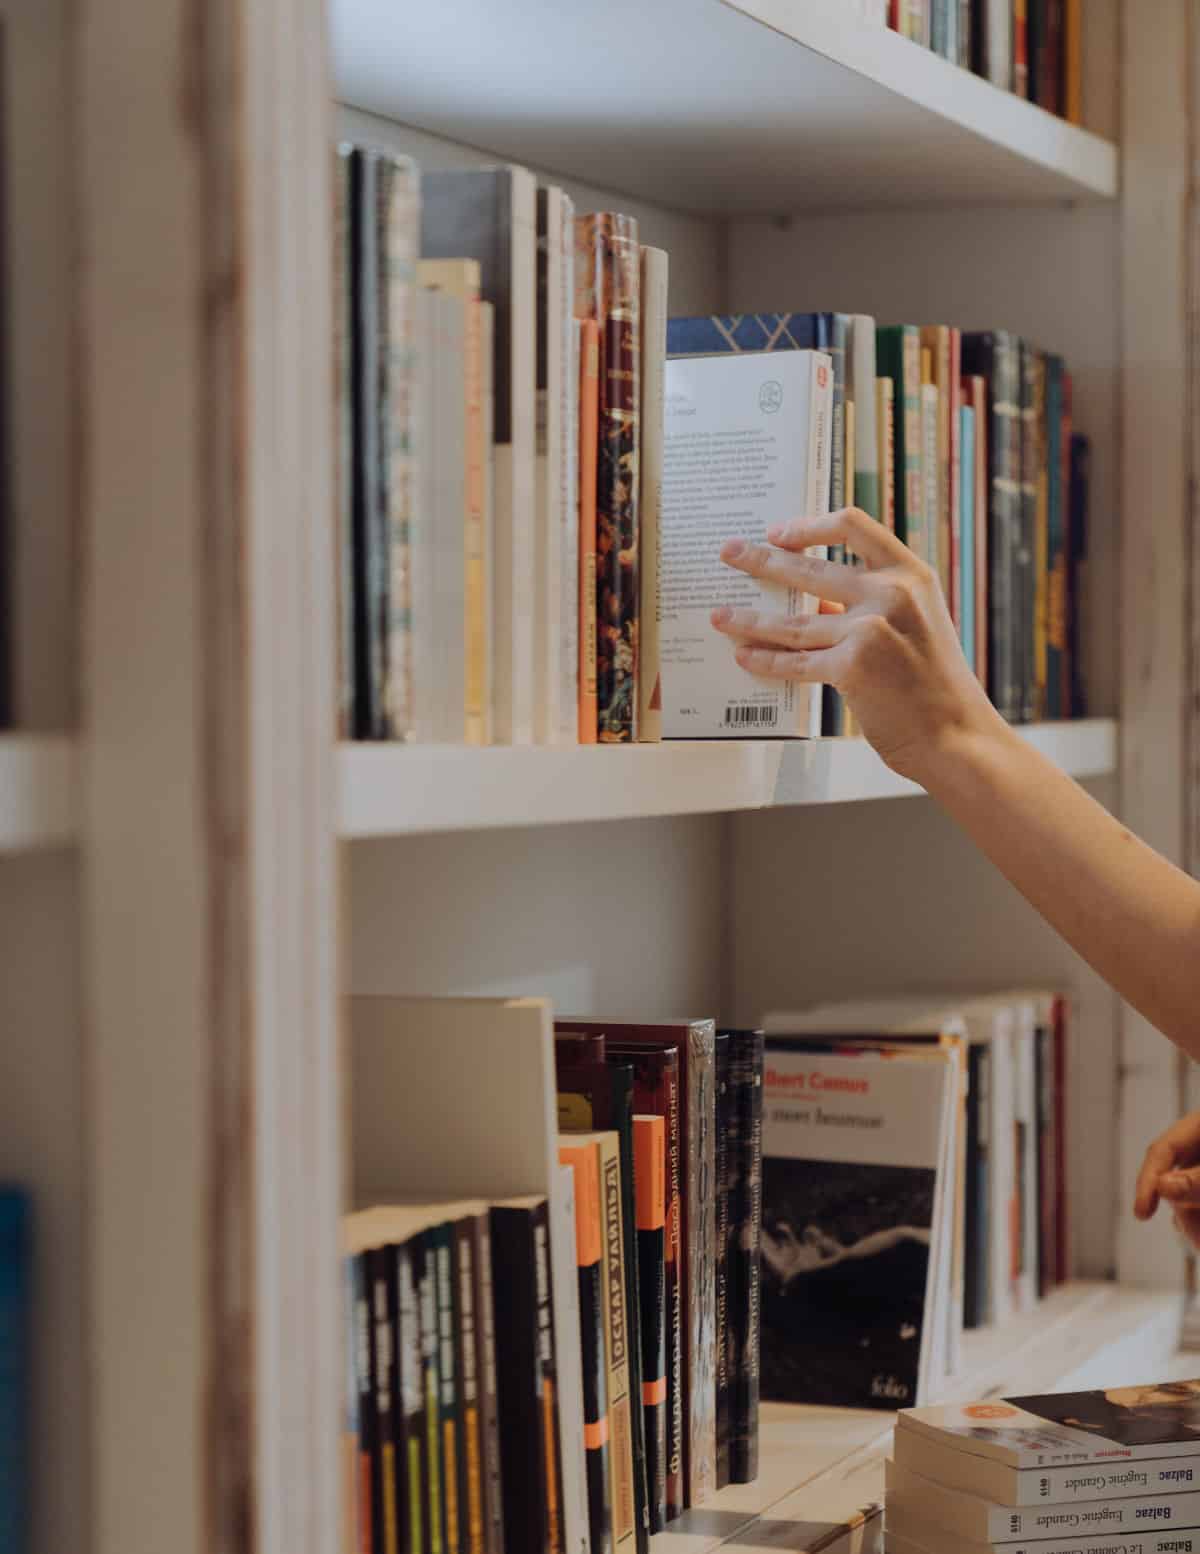 Person reaching up to out book back on a shelf with multiple books.